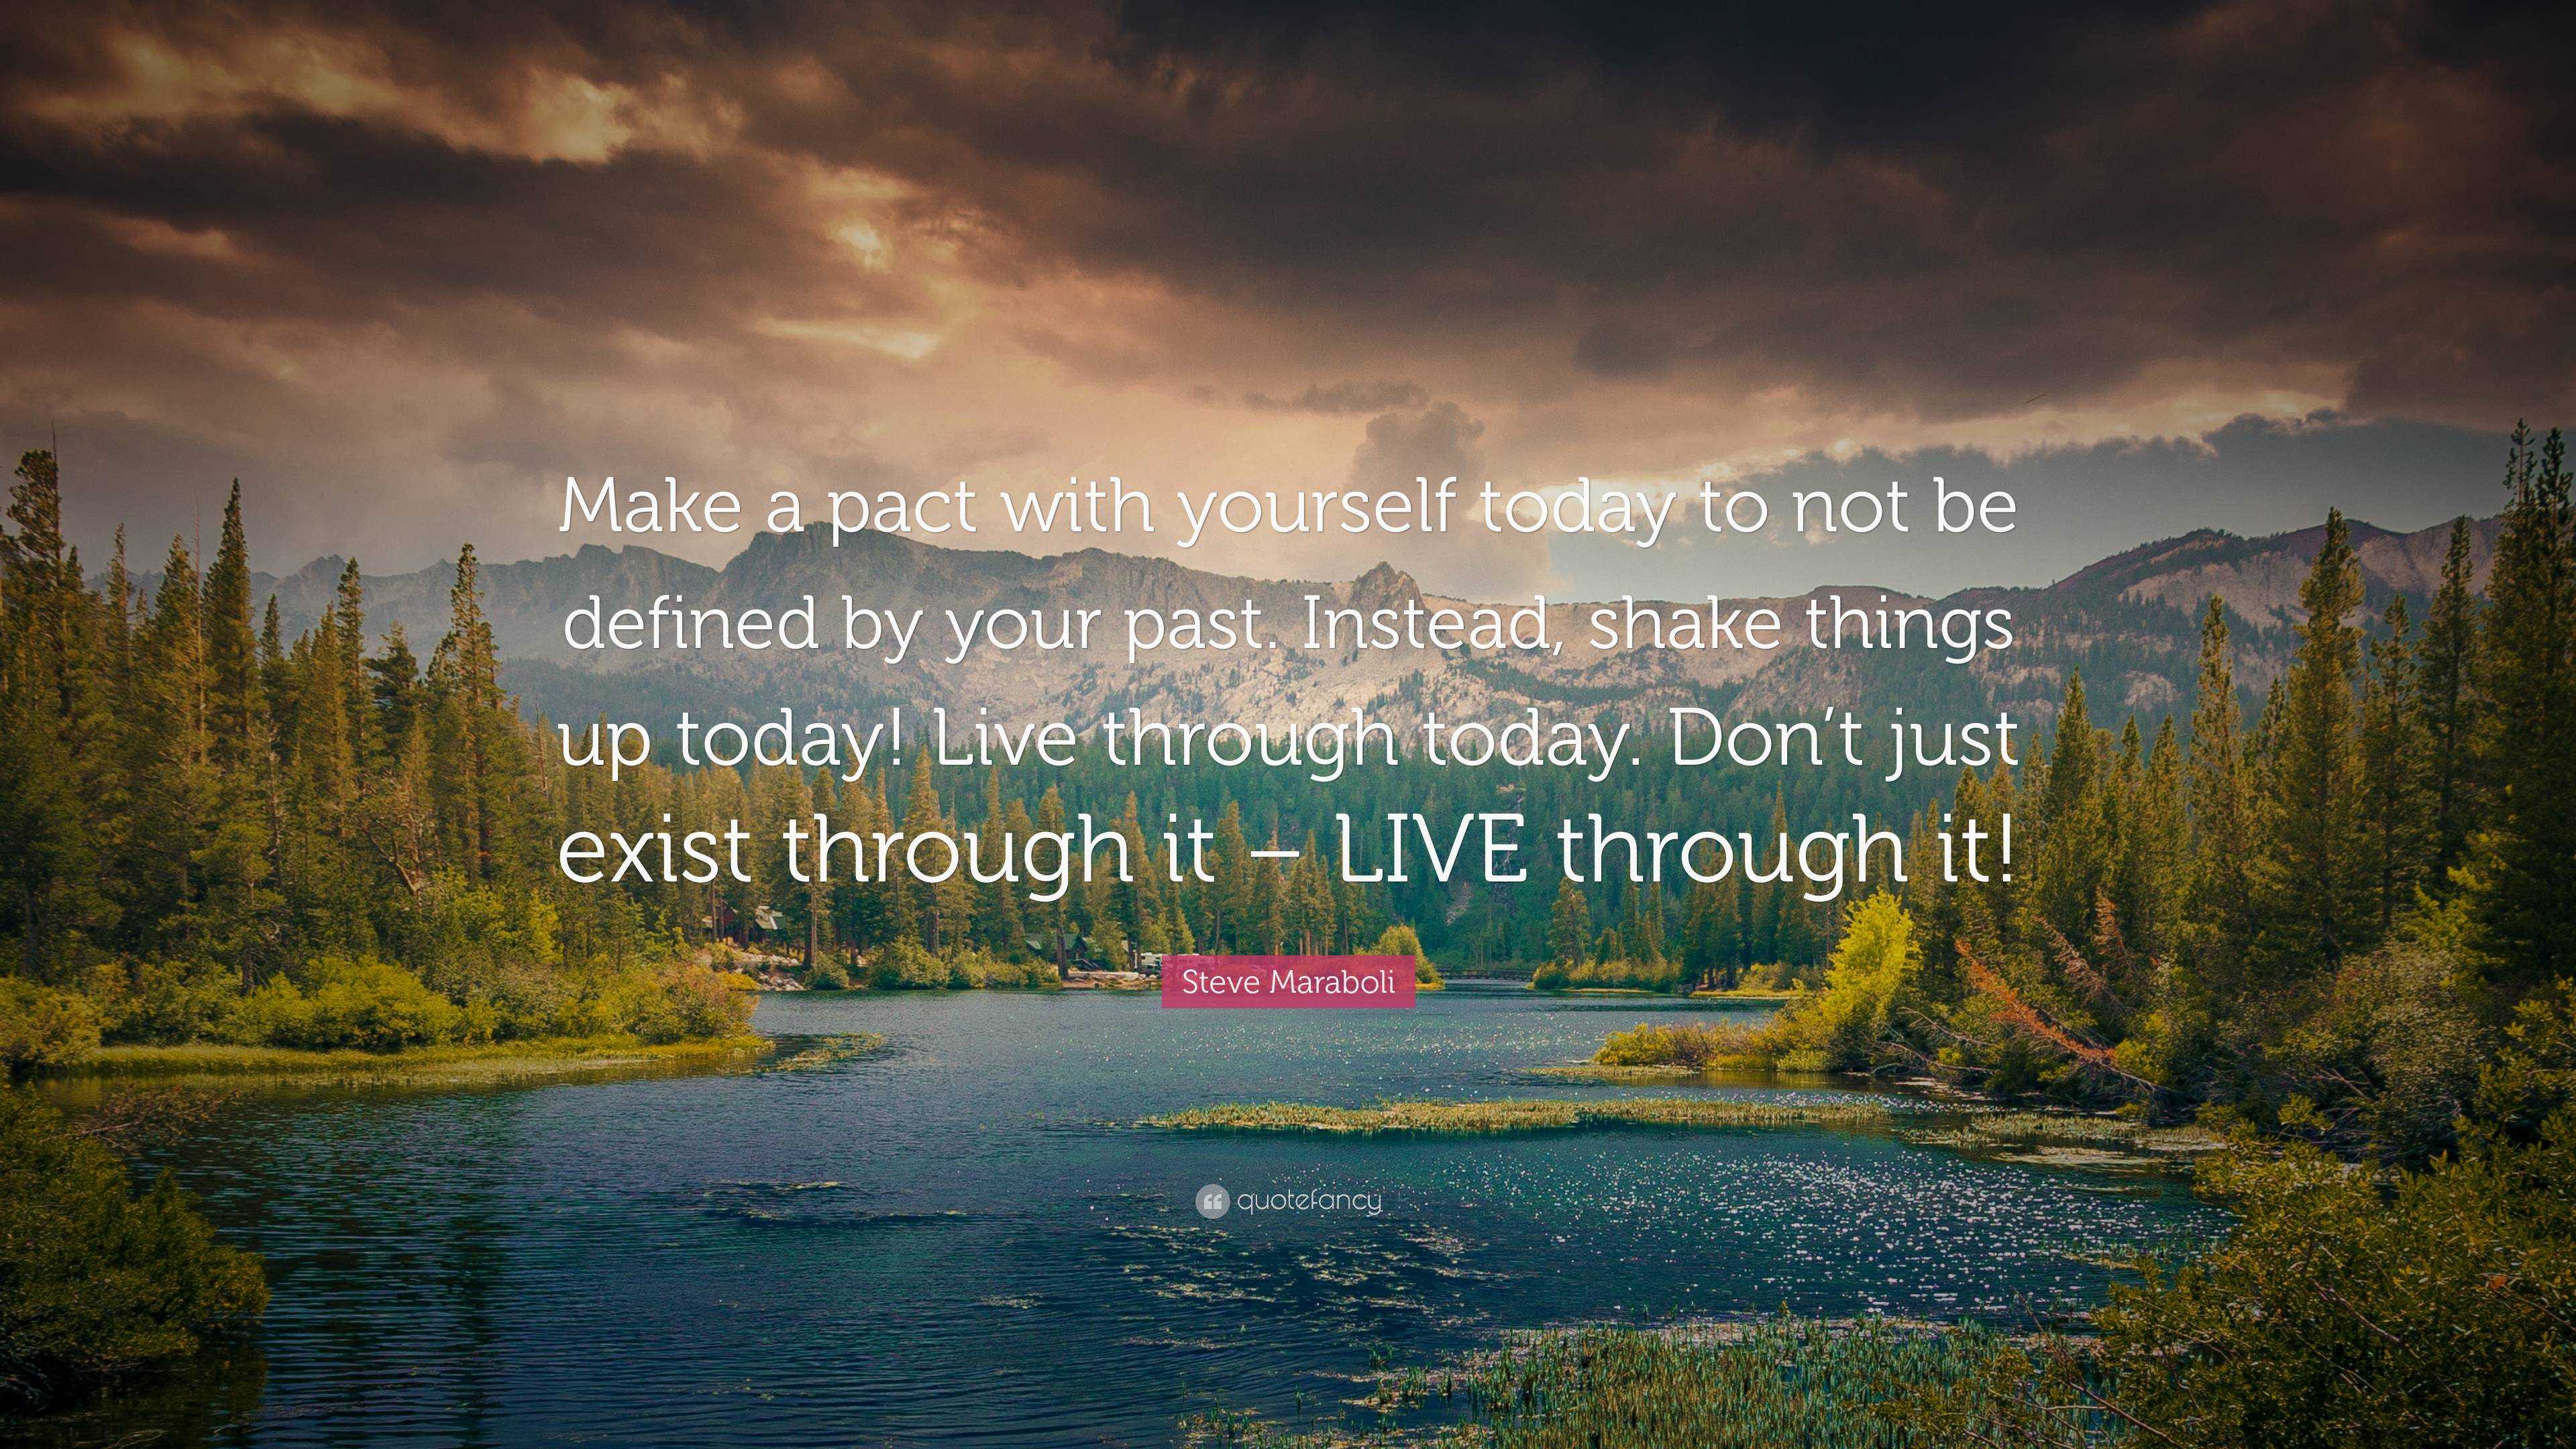 Steve Maraboli Quote: “Make a pact with yourself today to not be ...